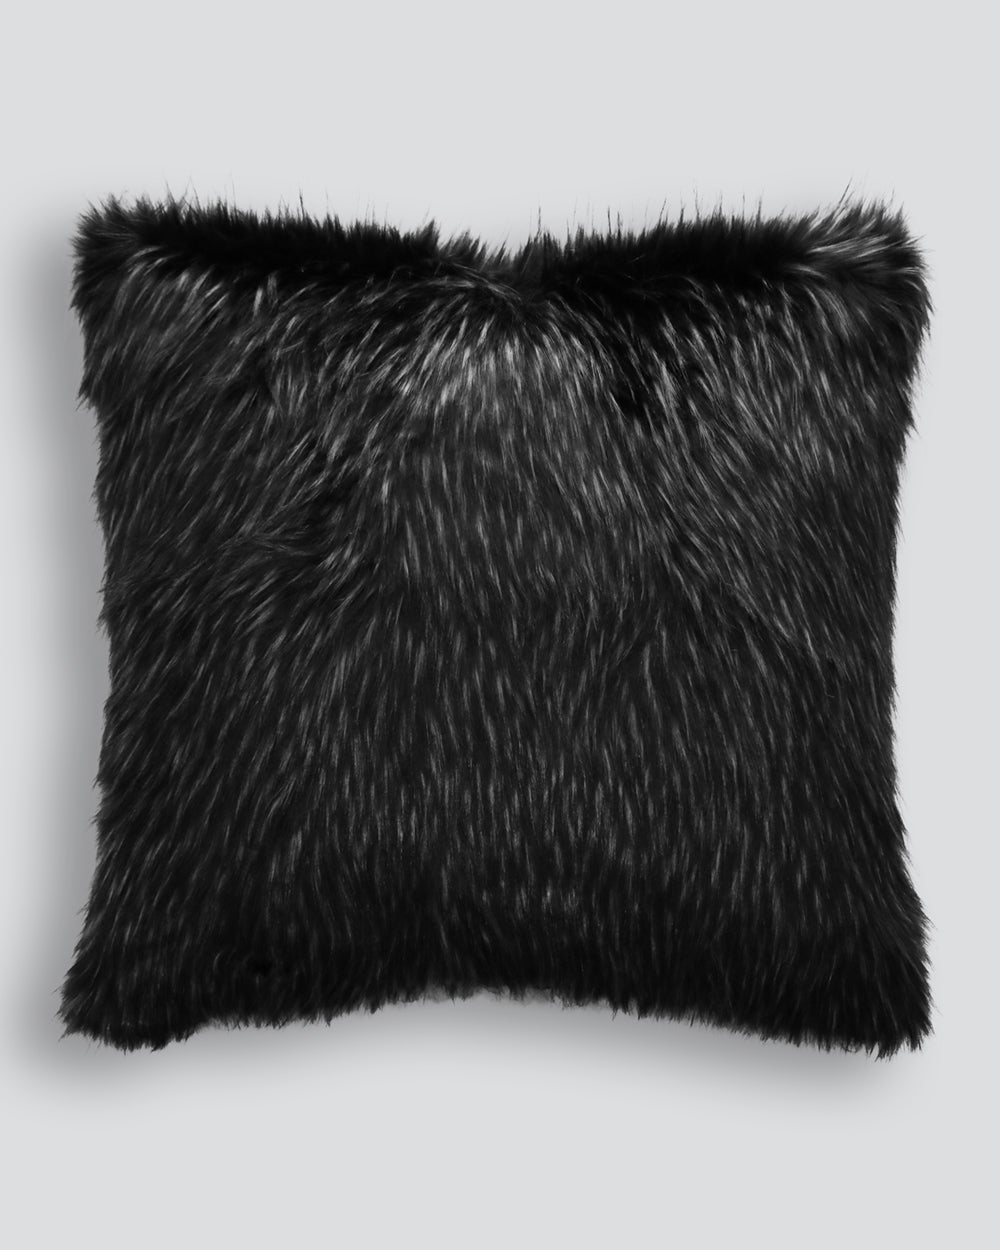 Heirloom Ebony Plume Cushions in Faux Fur are available from Make Your House A Home Premium Stockist. Furniture Store Bendigo, Victoria. Australia Wide Delivery. Furtex Baya.